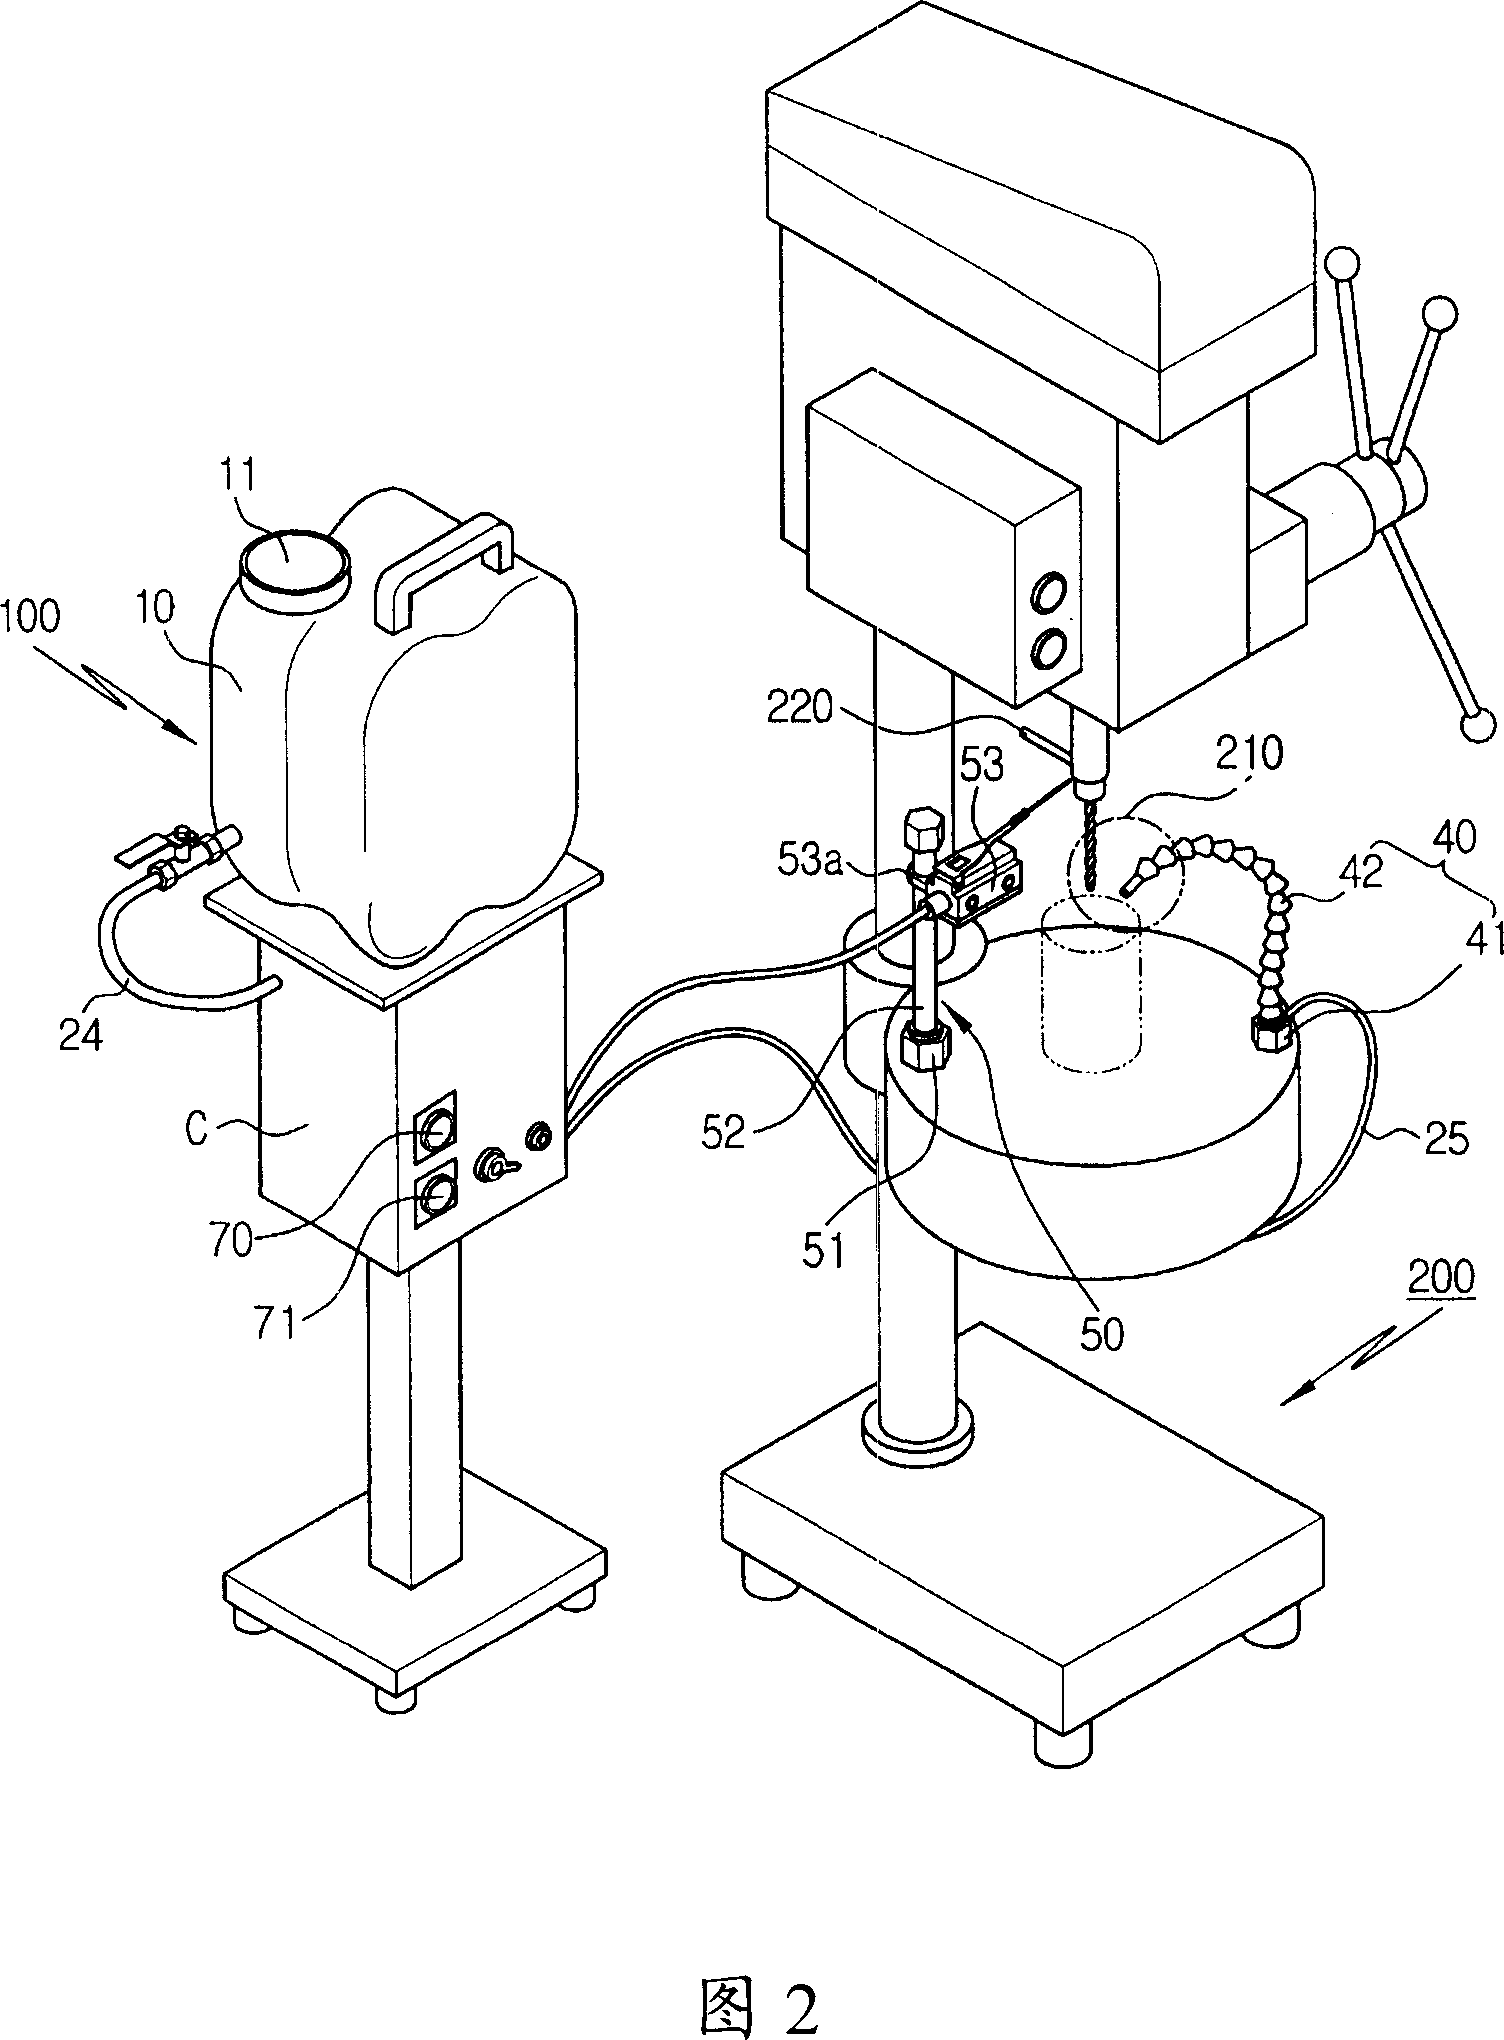 A portable apparatus for suppling cutting oil